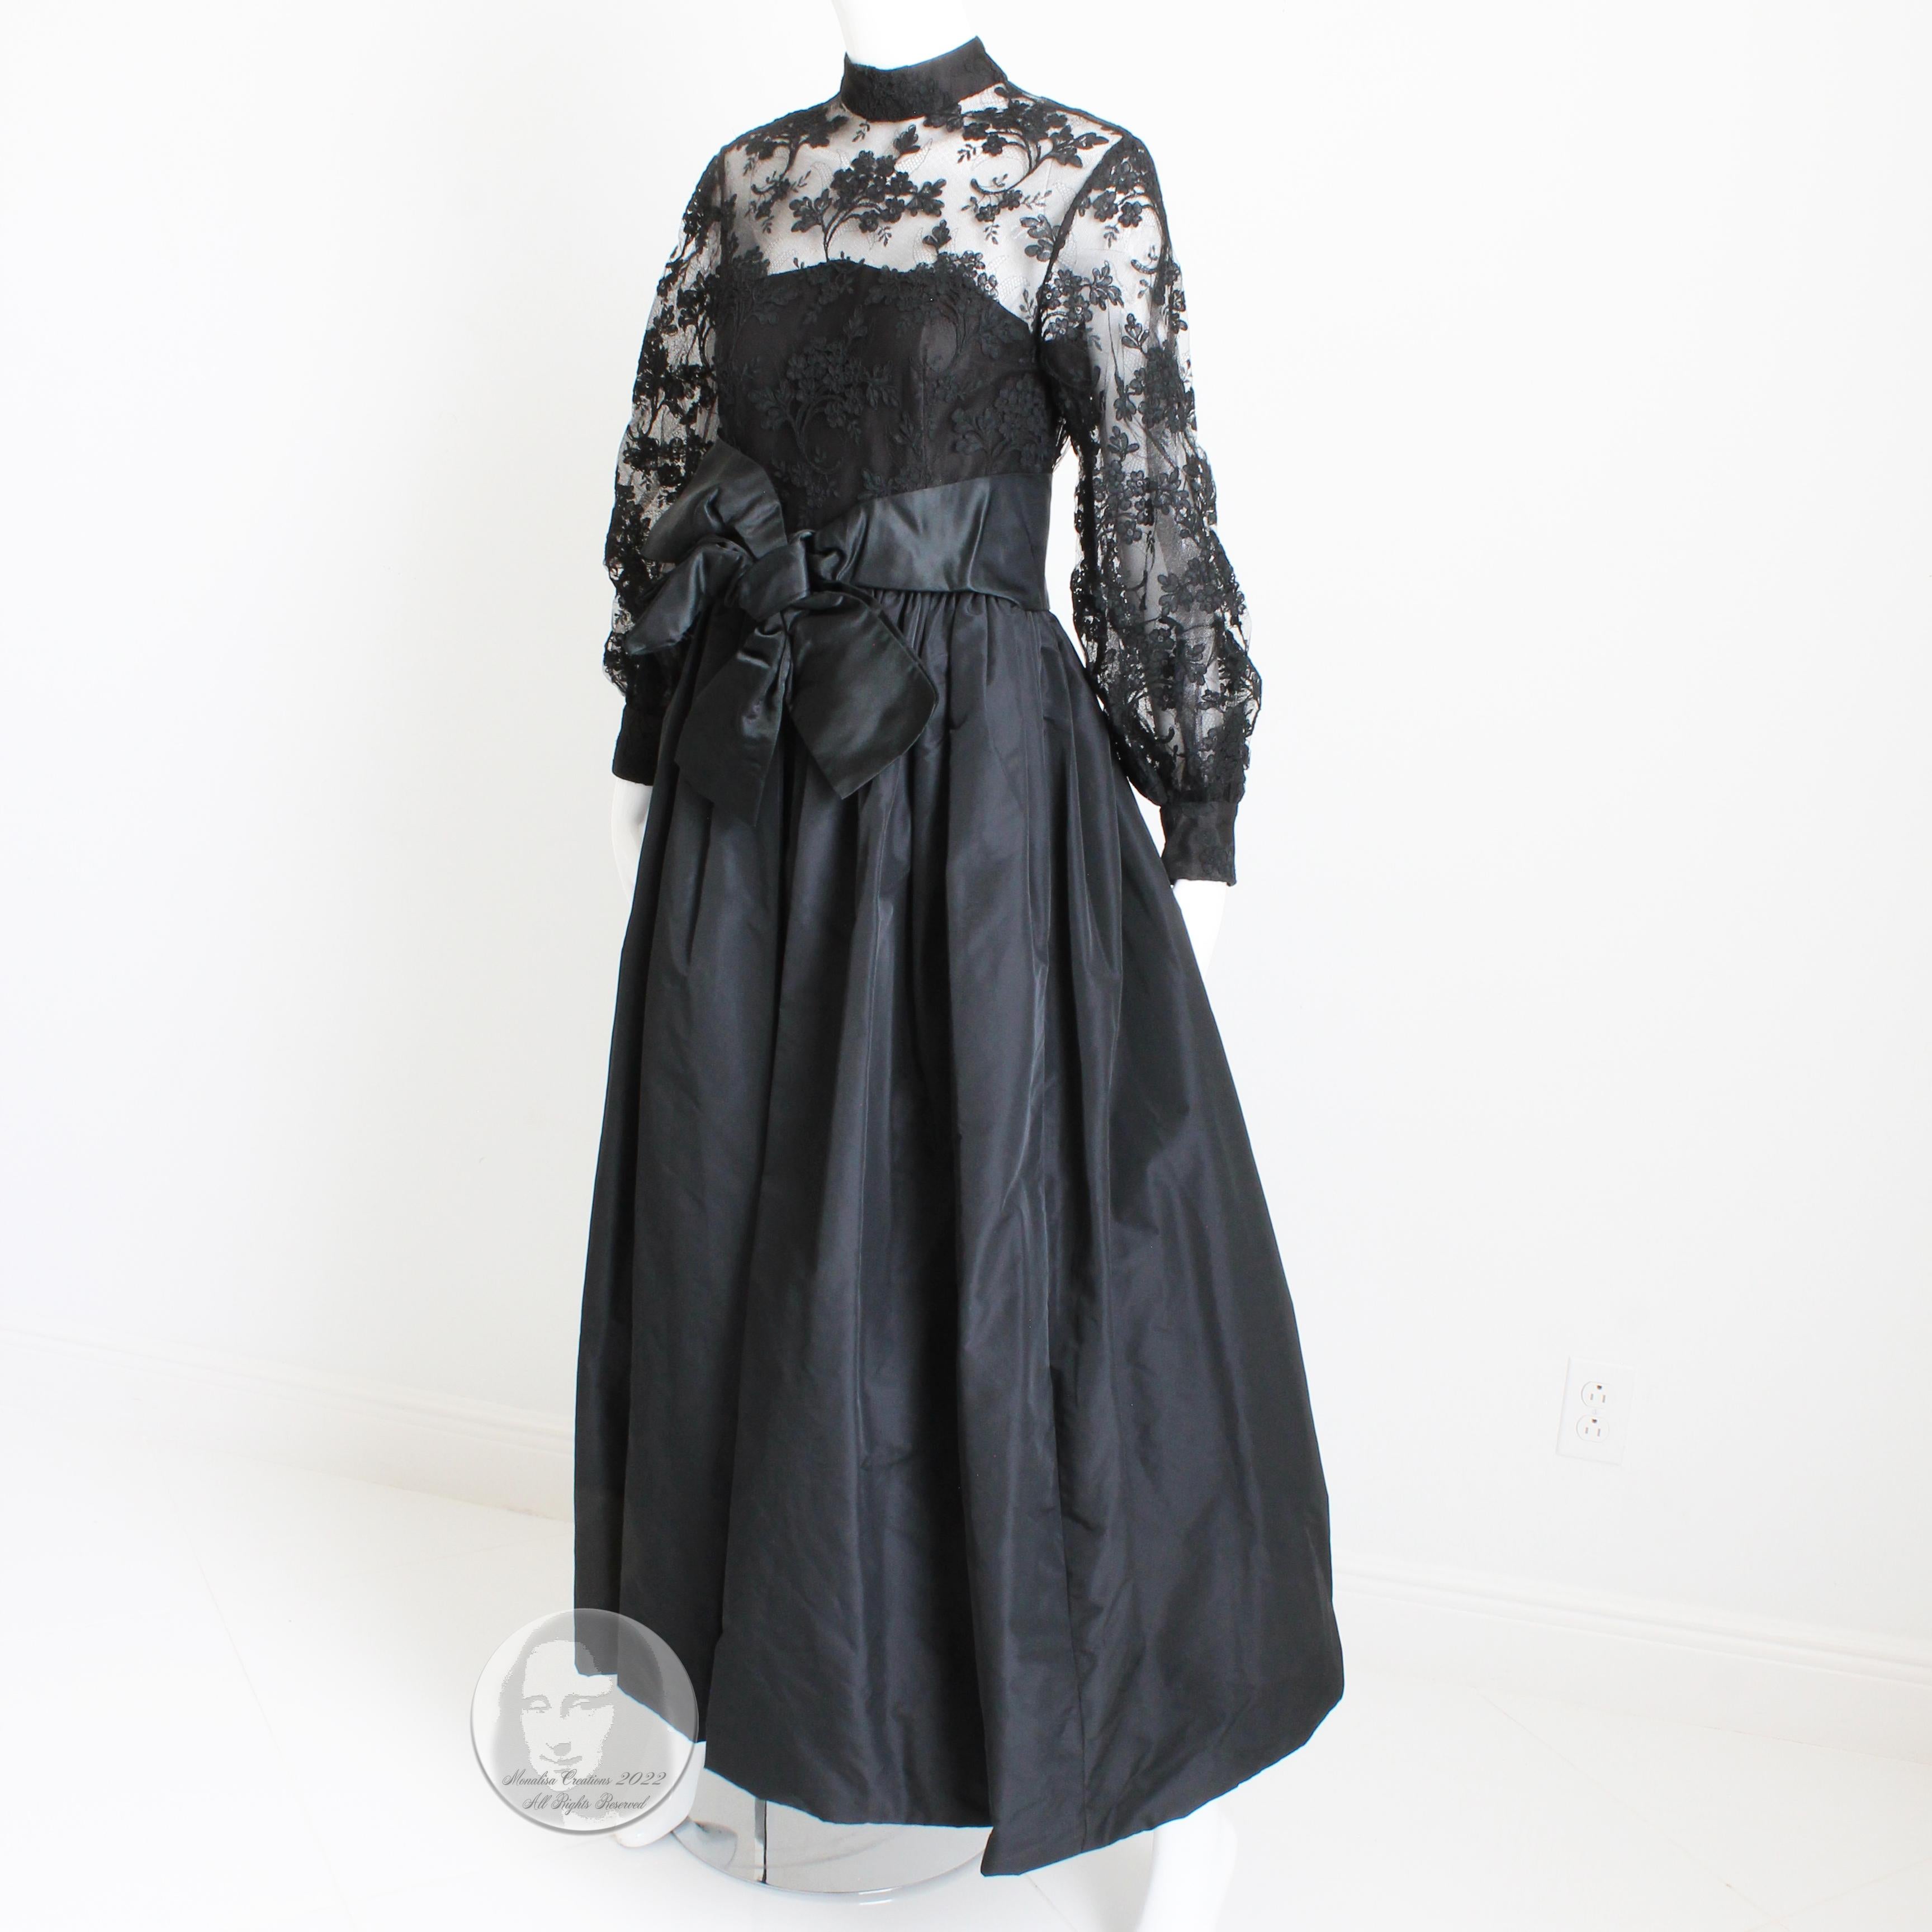 Women's Ronald Amey Evening Gown Black Lace and Silk Taffeta Formal Dress Vintage 70s 